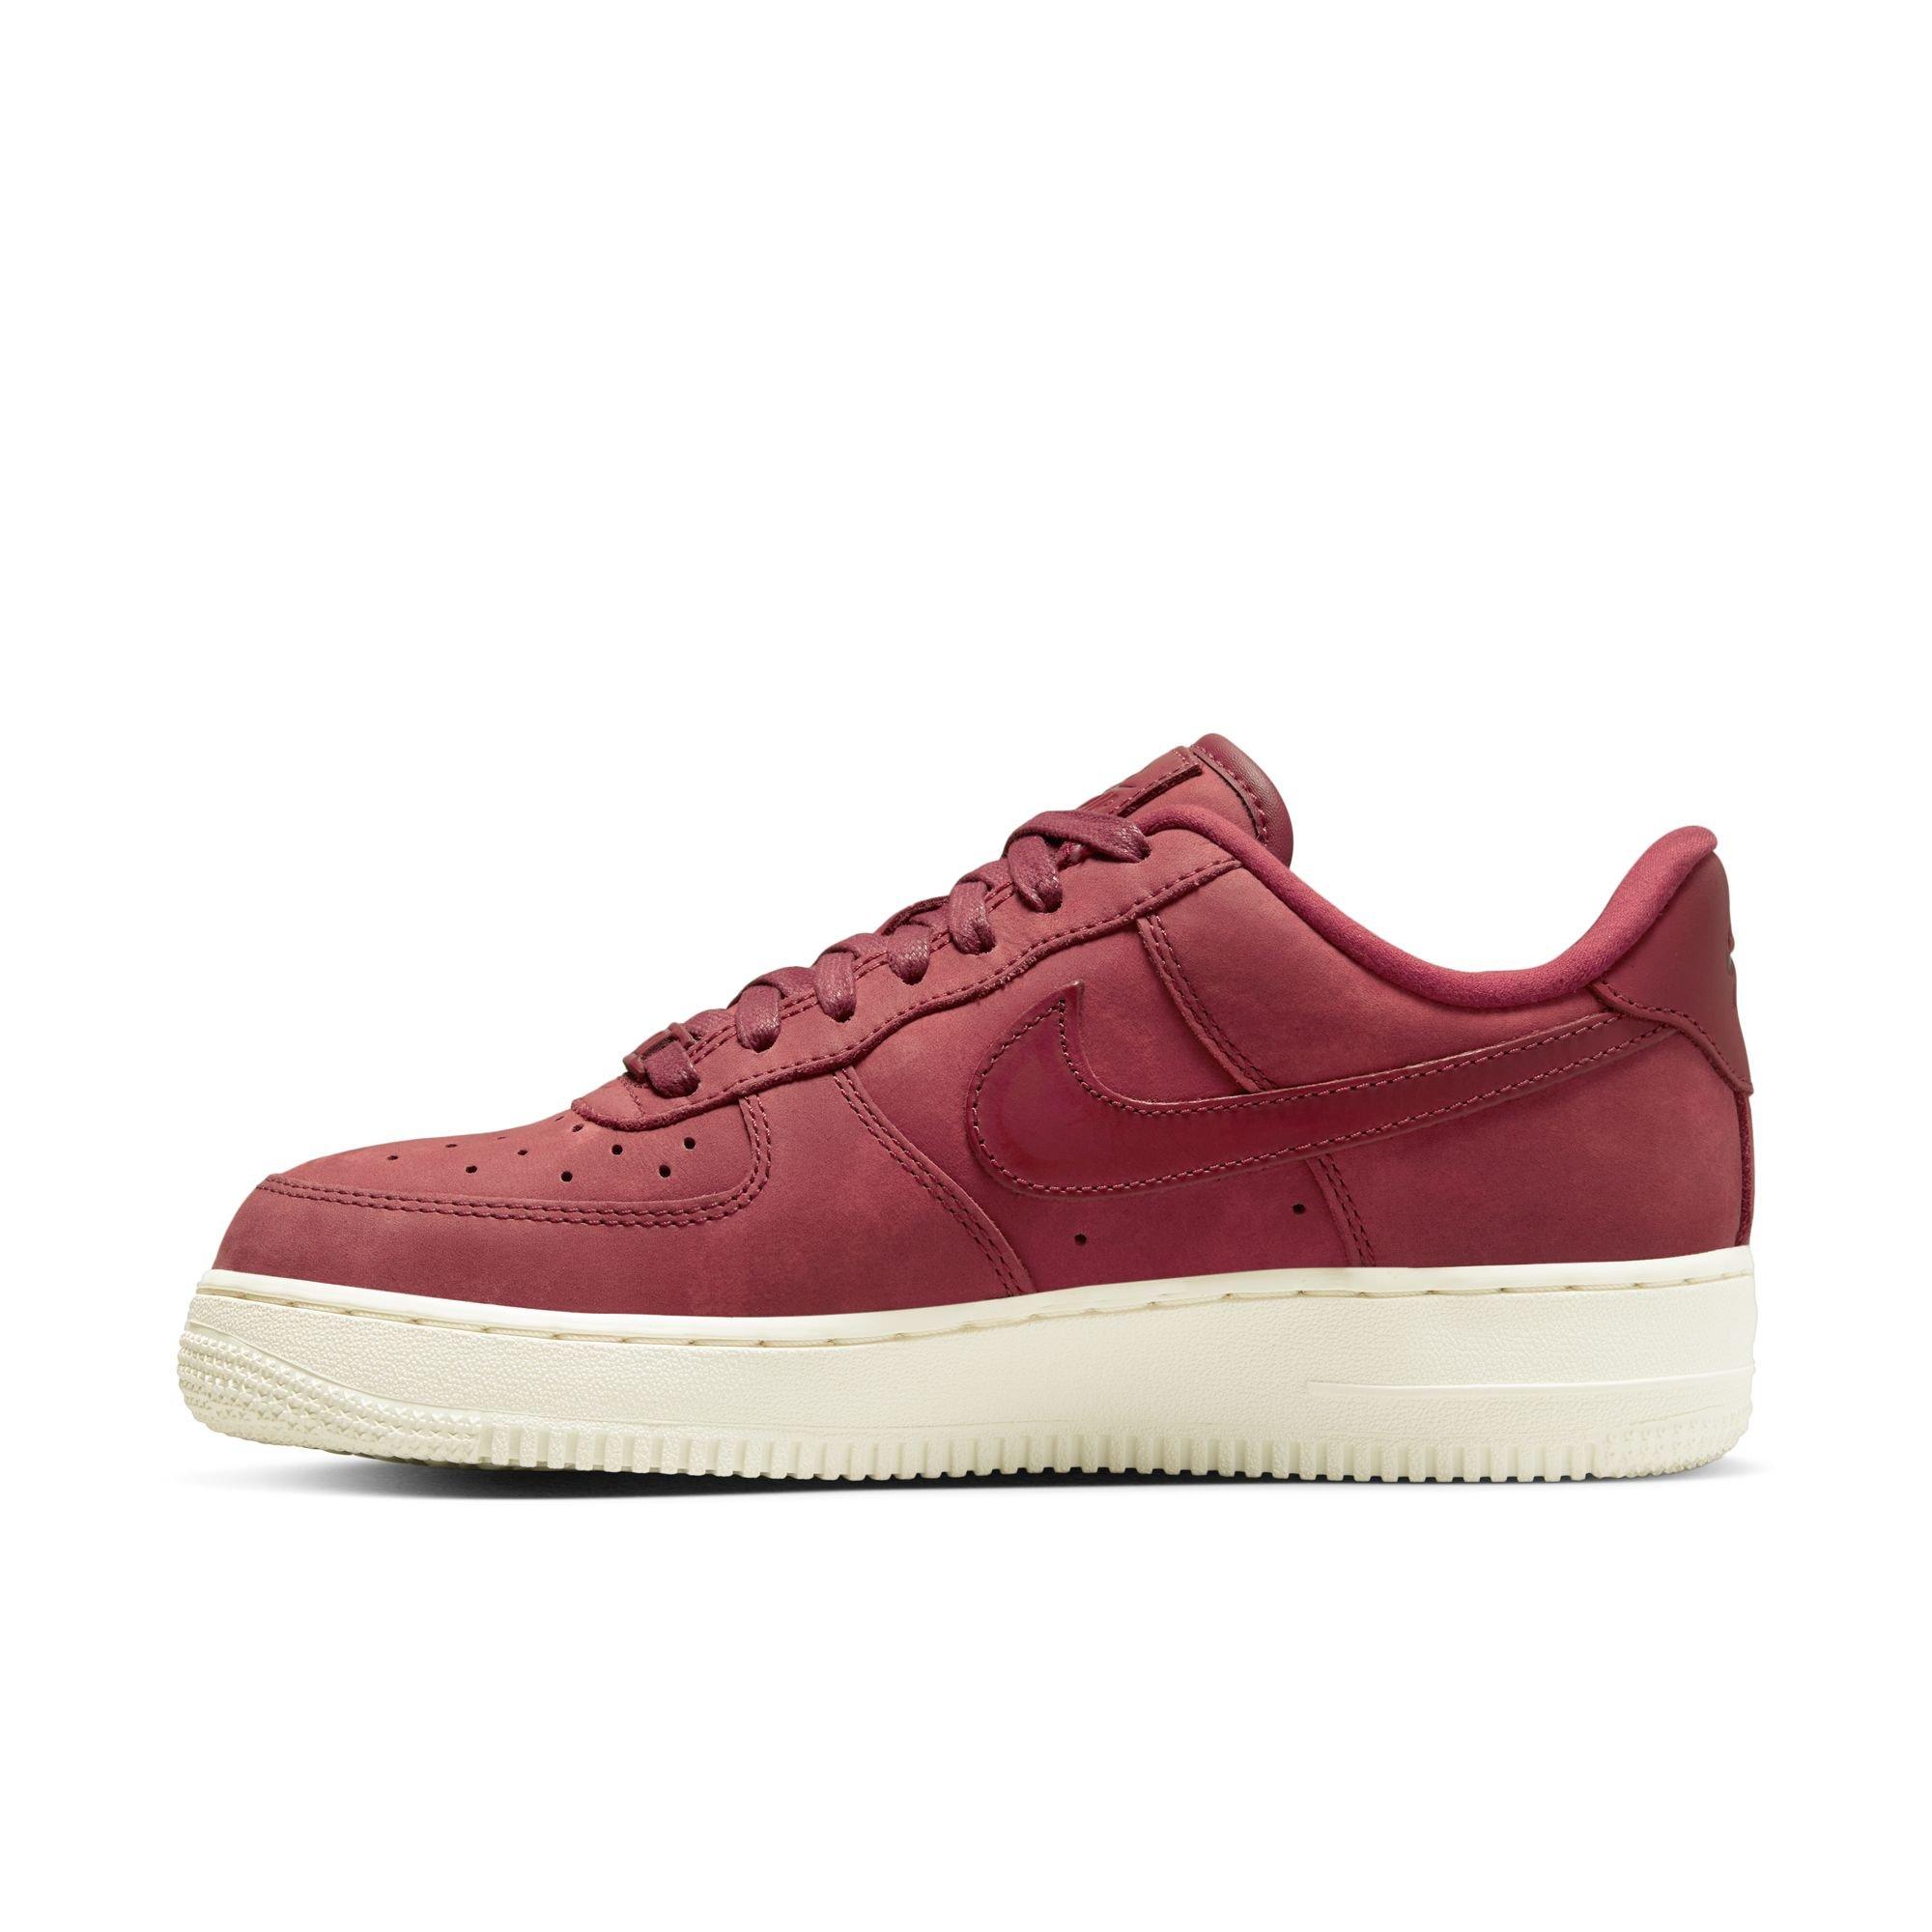 pizza Slepen Ooit Nike Air Force 1 '07 PRM "Team Red/Sail" Women's Shoe